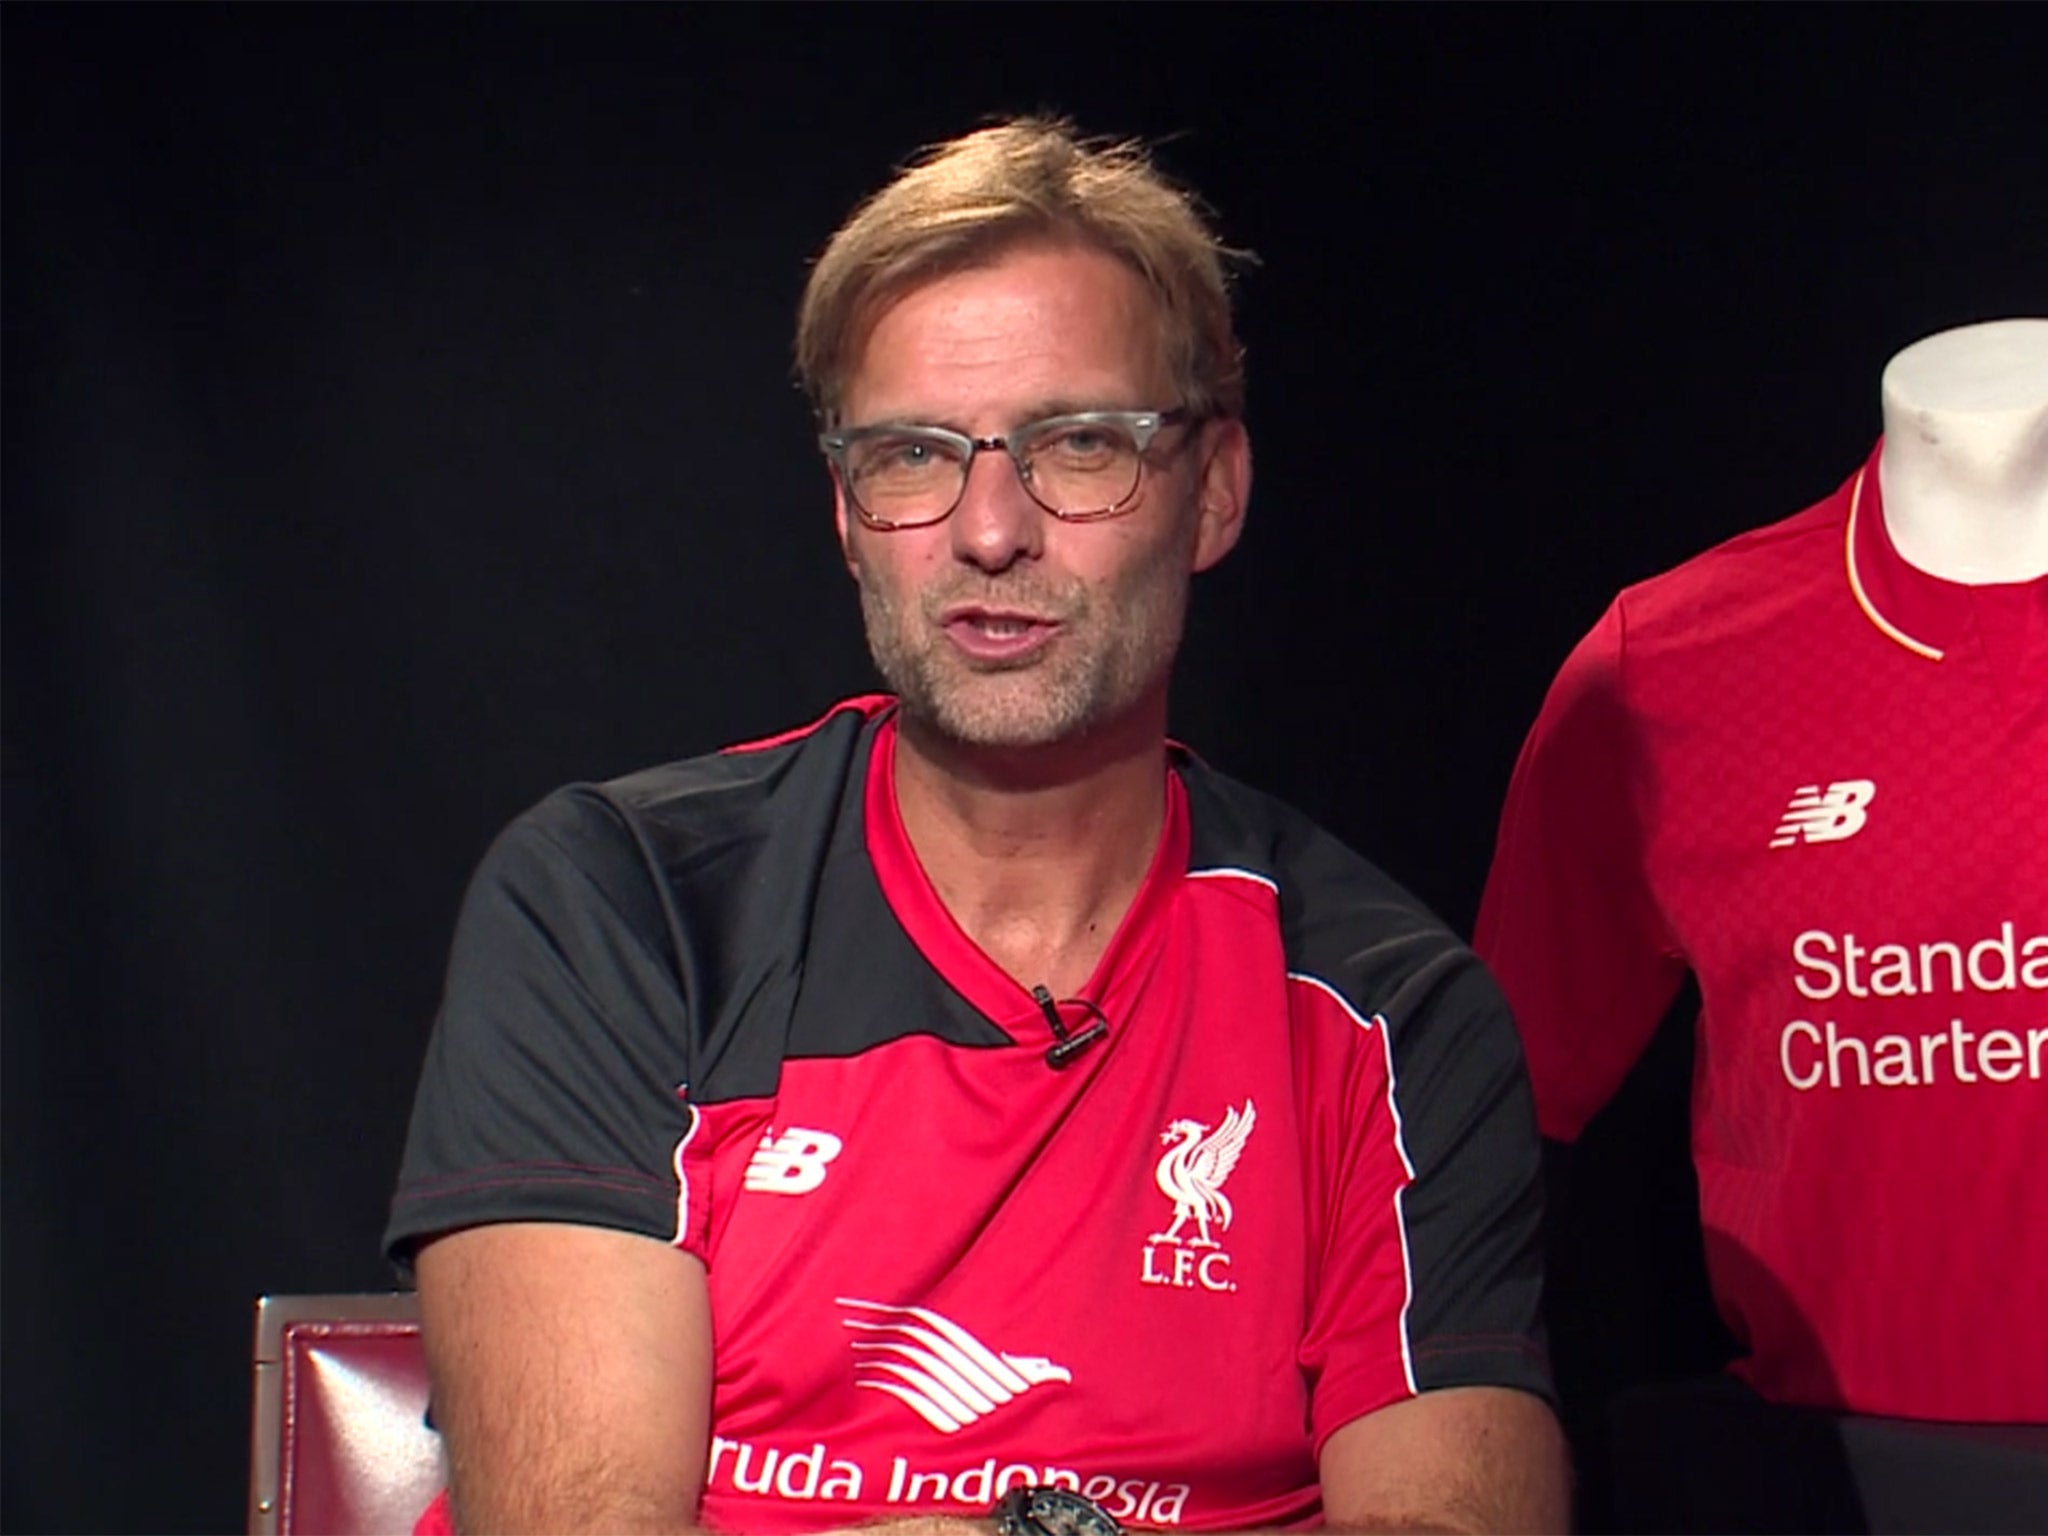 Klopp was the fans' favourite to get the job and represents a major coup for the club